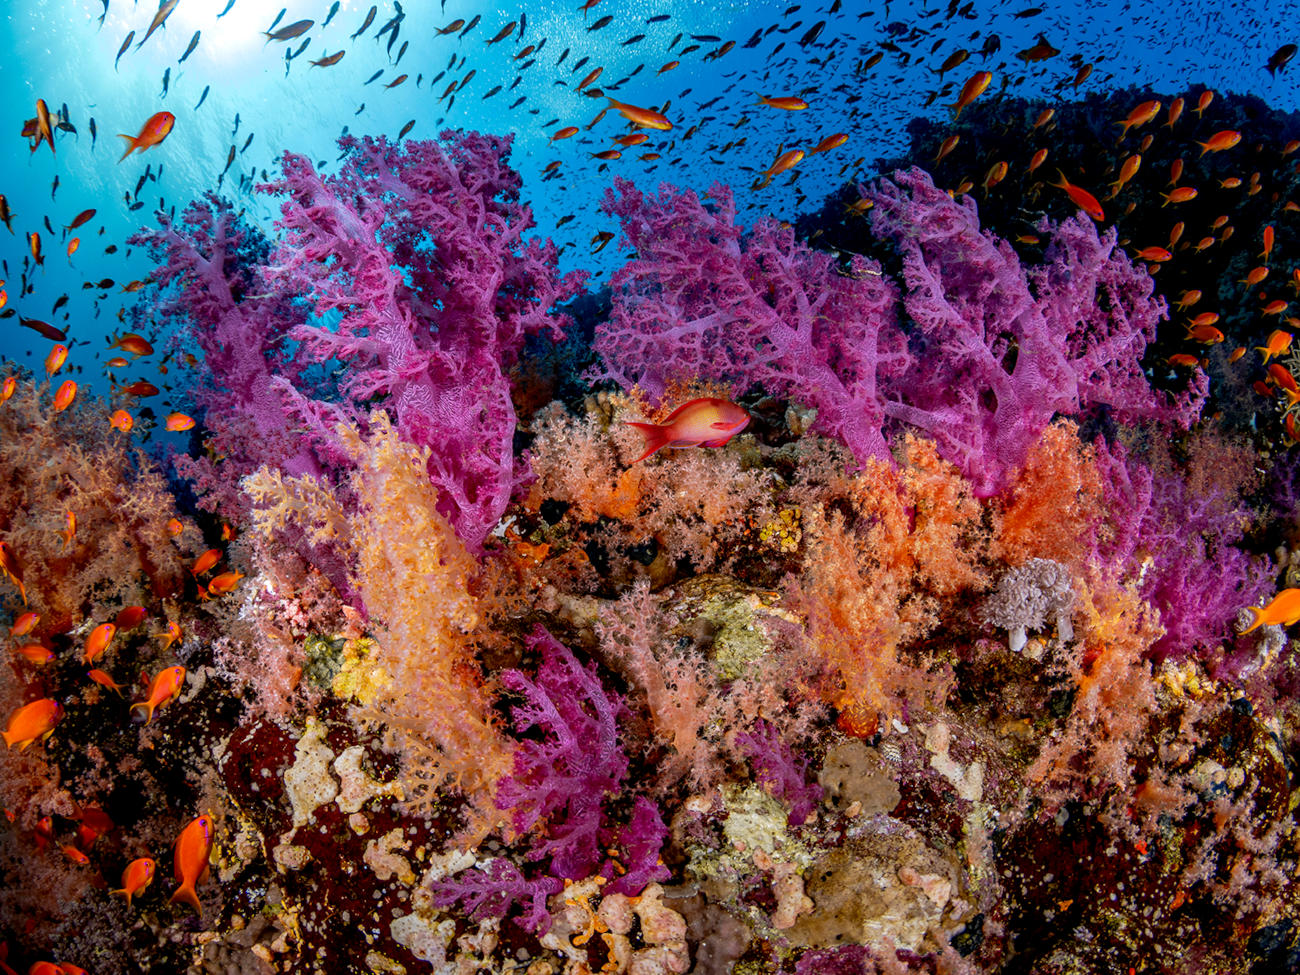 A shoal of small fish floats through a colorful coral reef in the ocean.